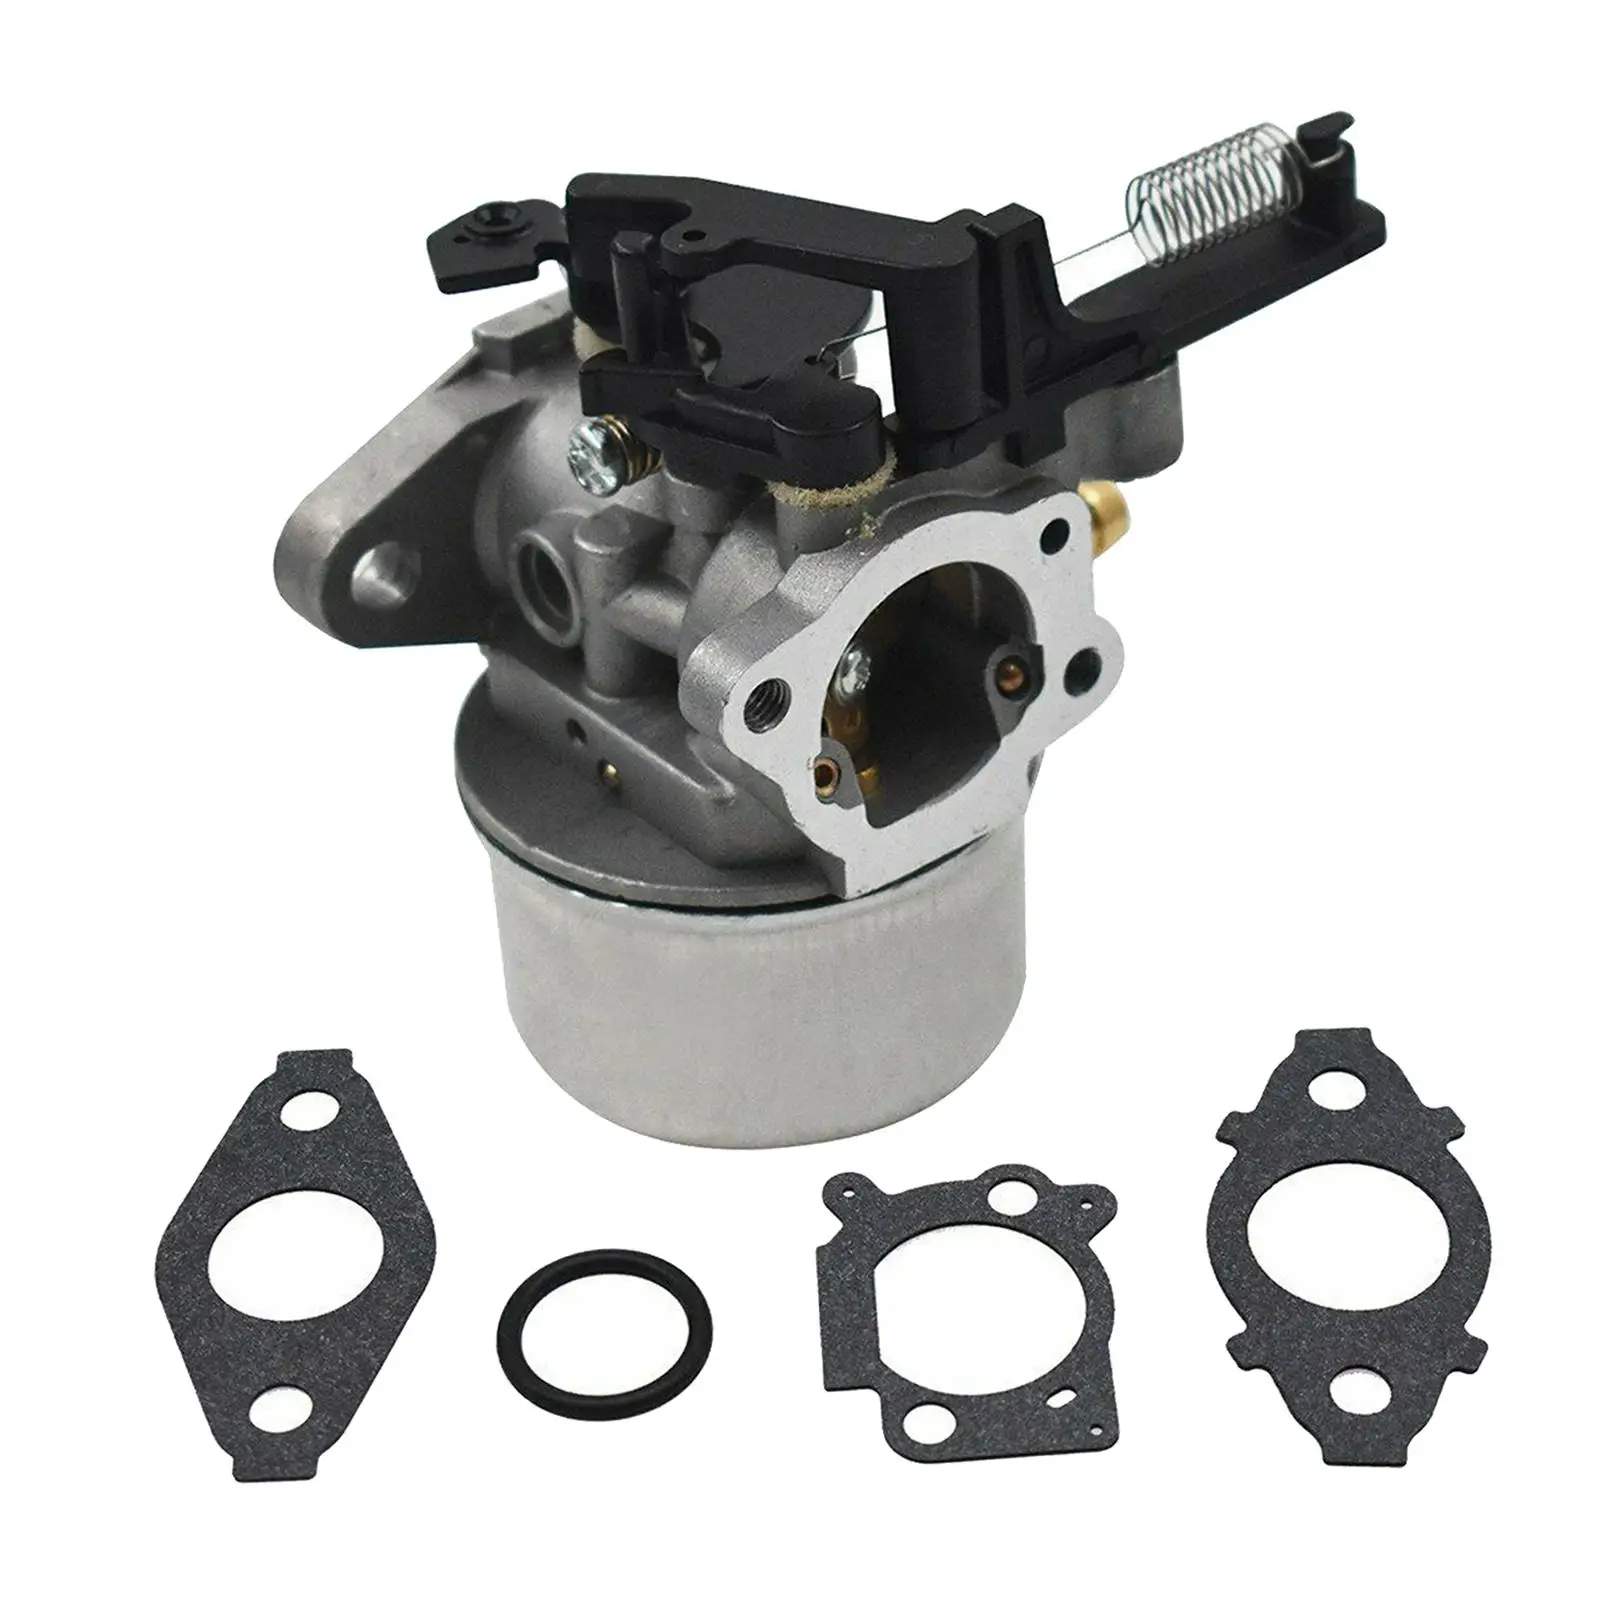 Carburetor for 591190948 Engines Lawn Mower 2700Psi 3000Psi Troy- Pressure Washer, Quality, Very Durable